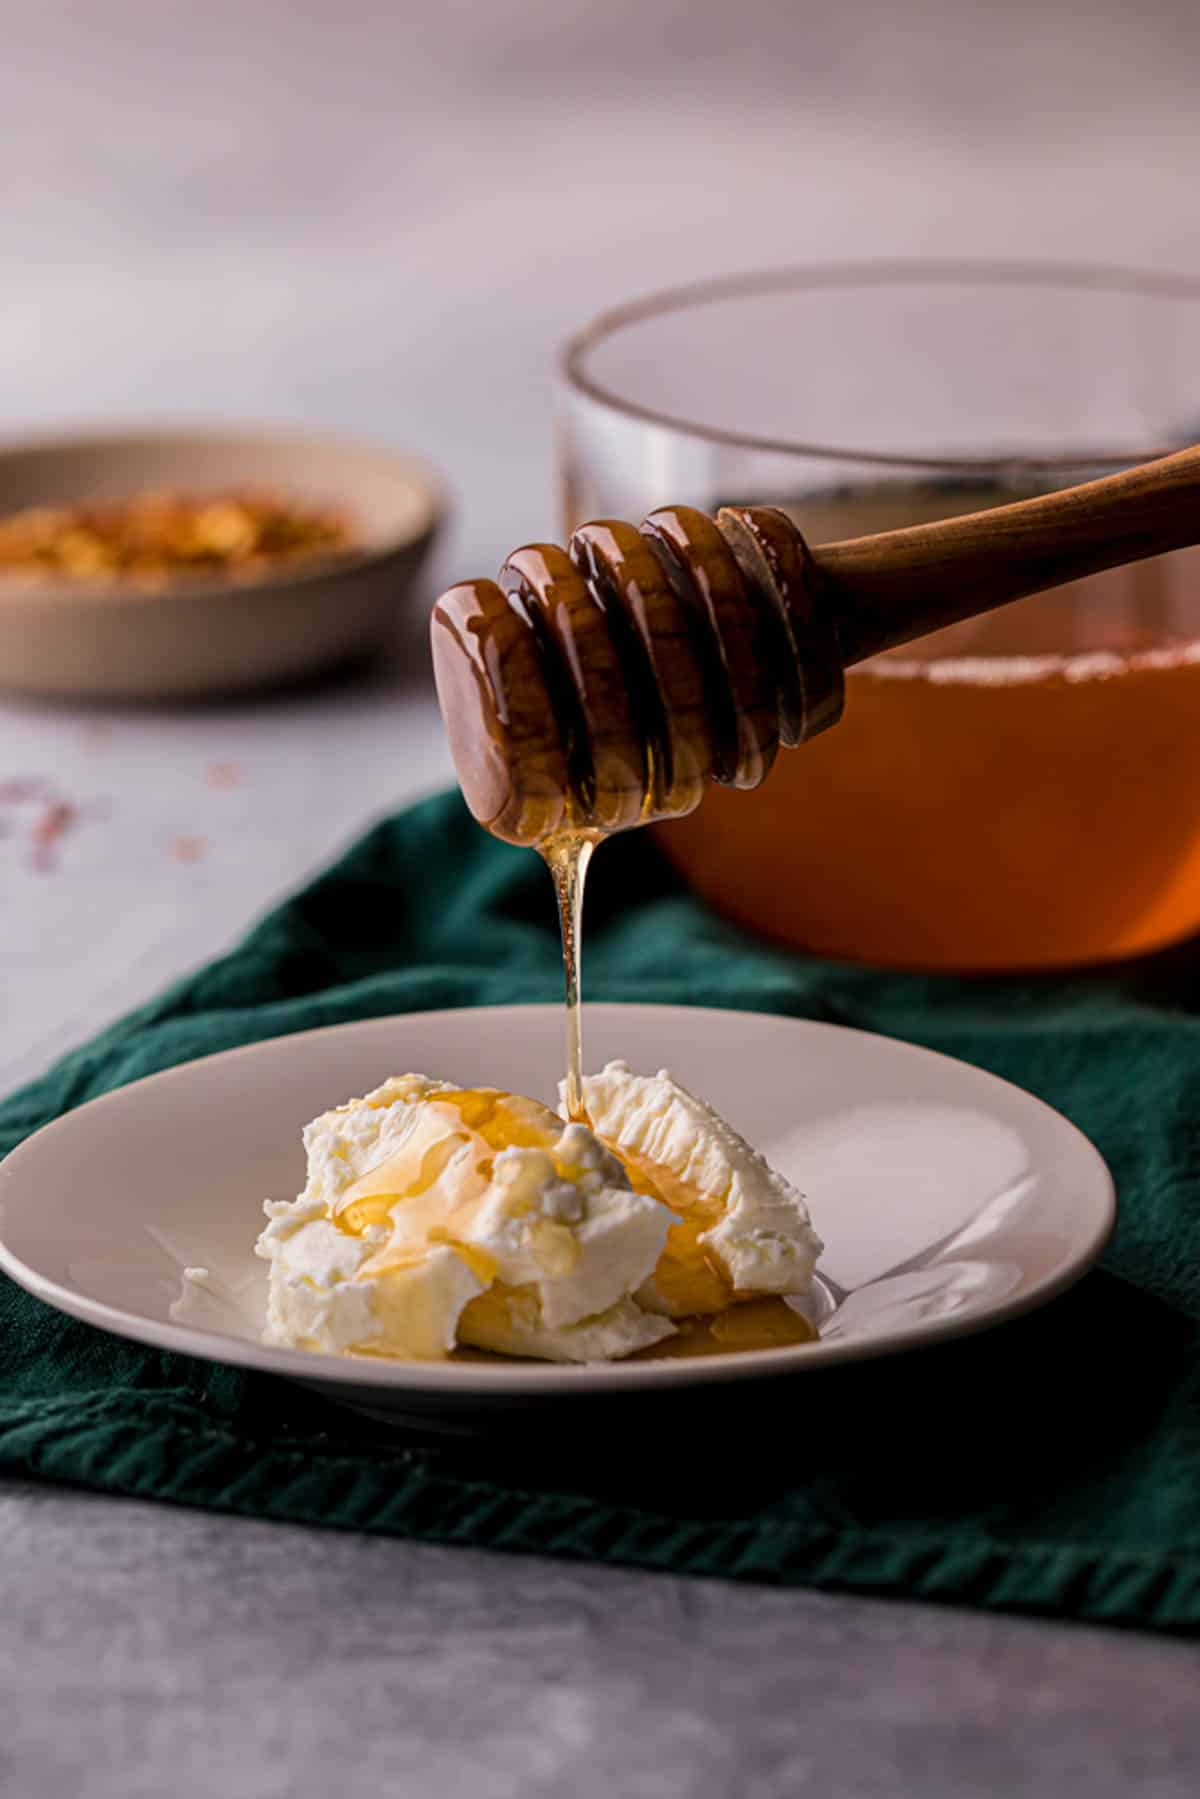 honey being drizzled over cheese on a plate